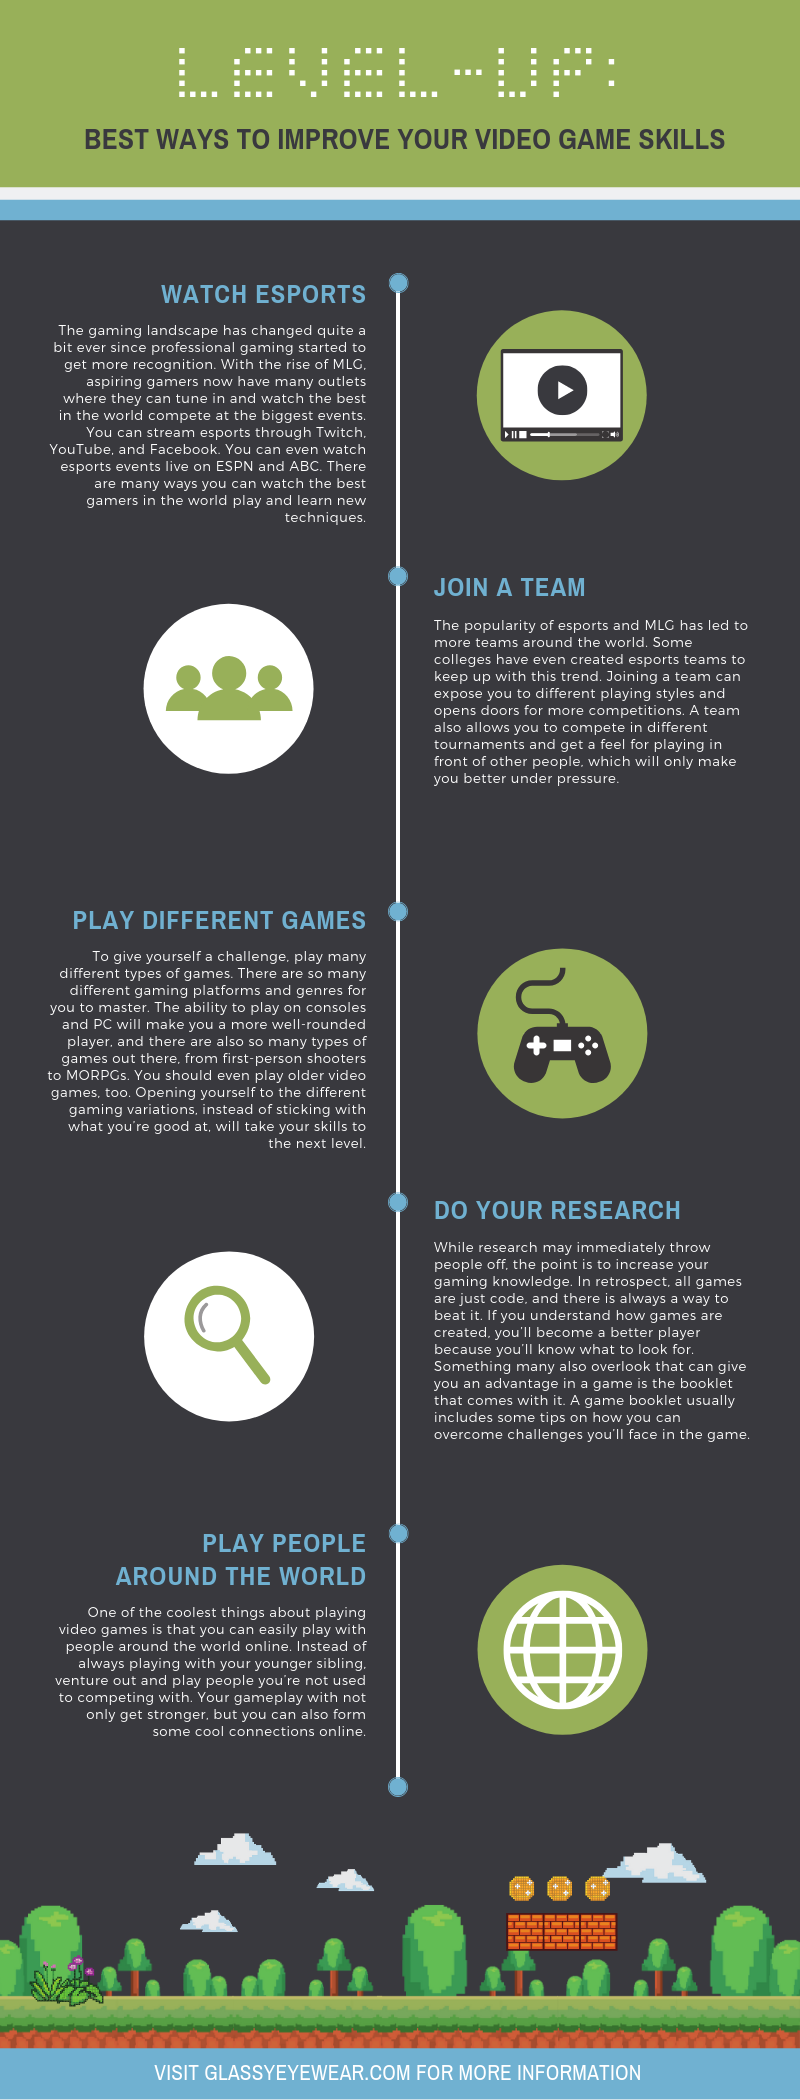 Improve Your Video Game Skills